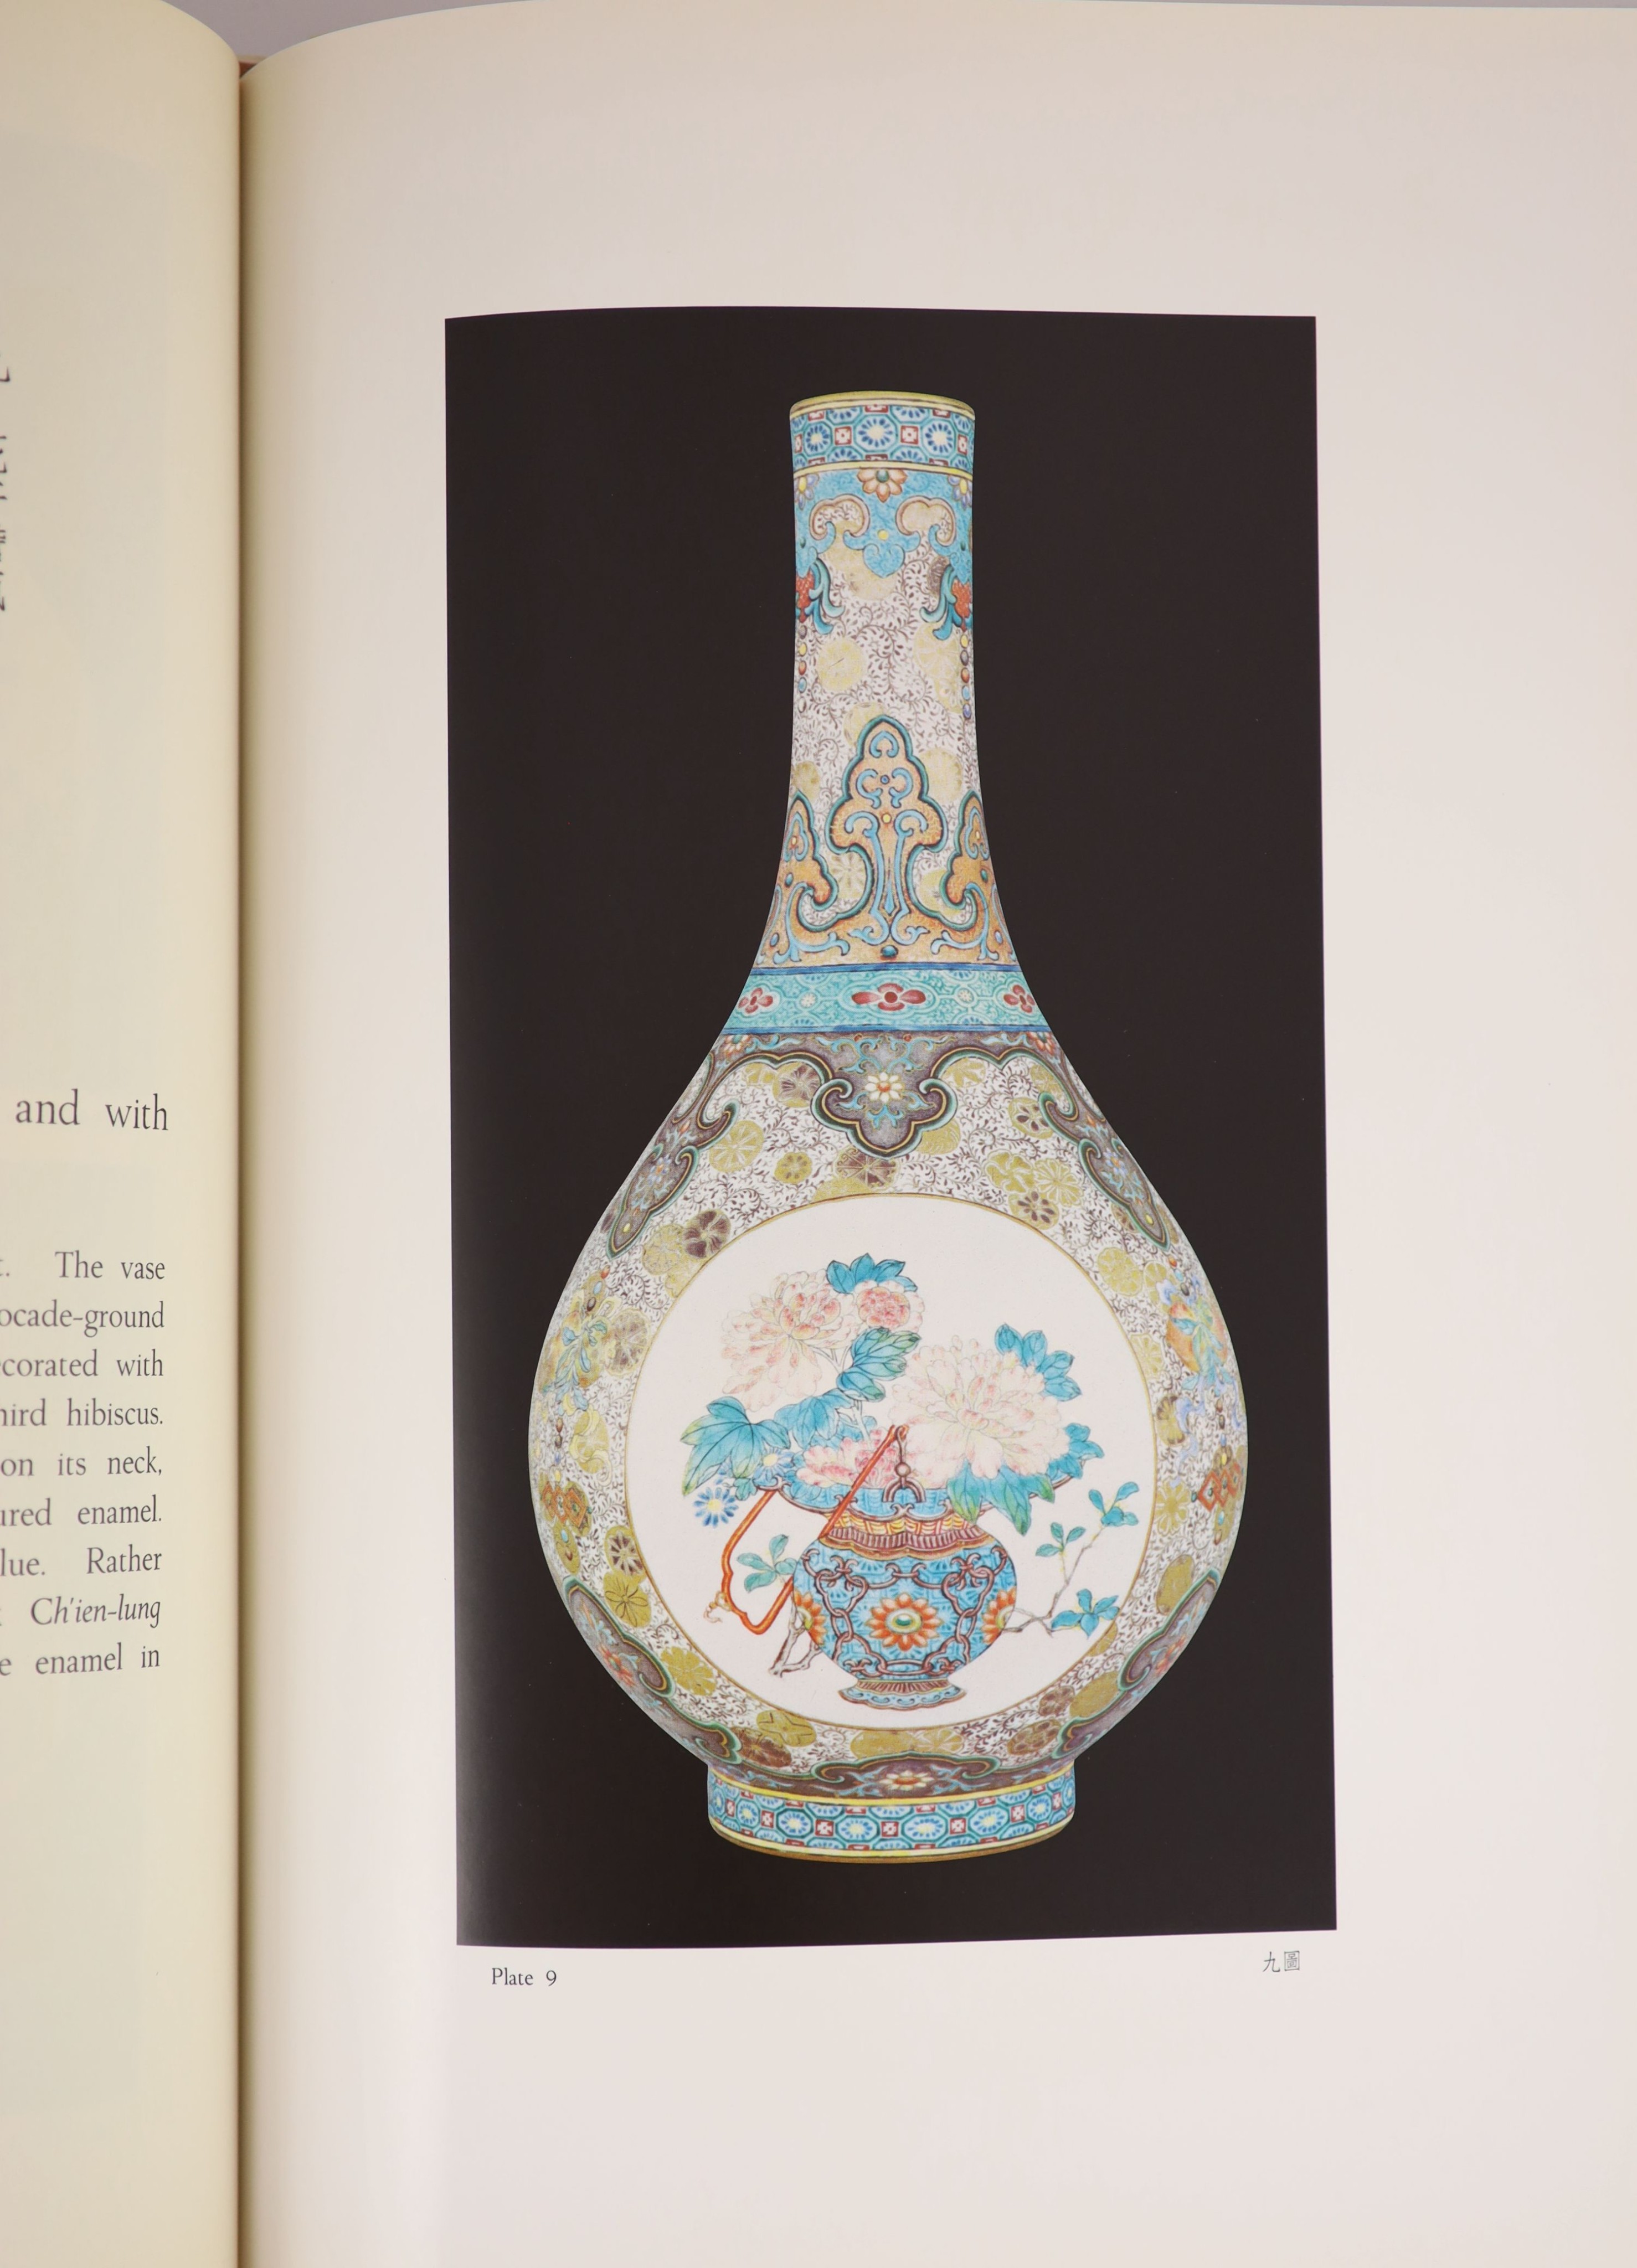 Porcelain of the National Palace - 'Fine Enamelled Ware of the Ching Dynasty and Chien Lung Periods', Vols I & II, published CAFA, 1967 and 'Treasures of China', 1970, two vols (4)